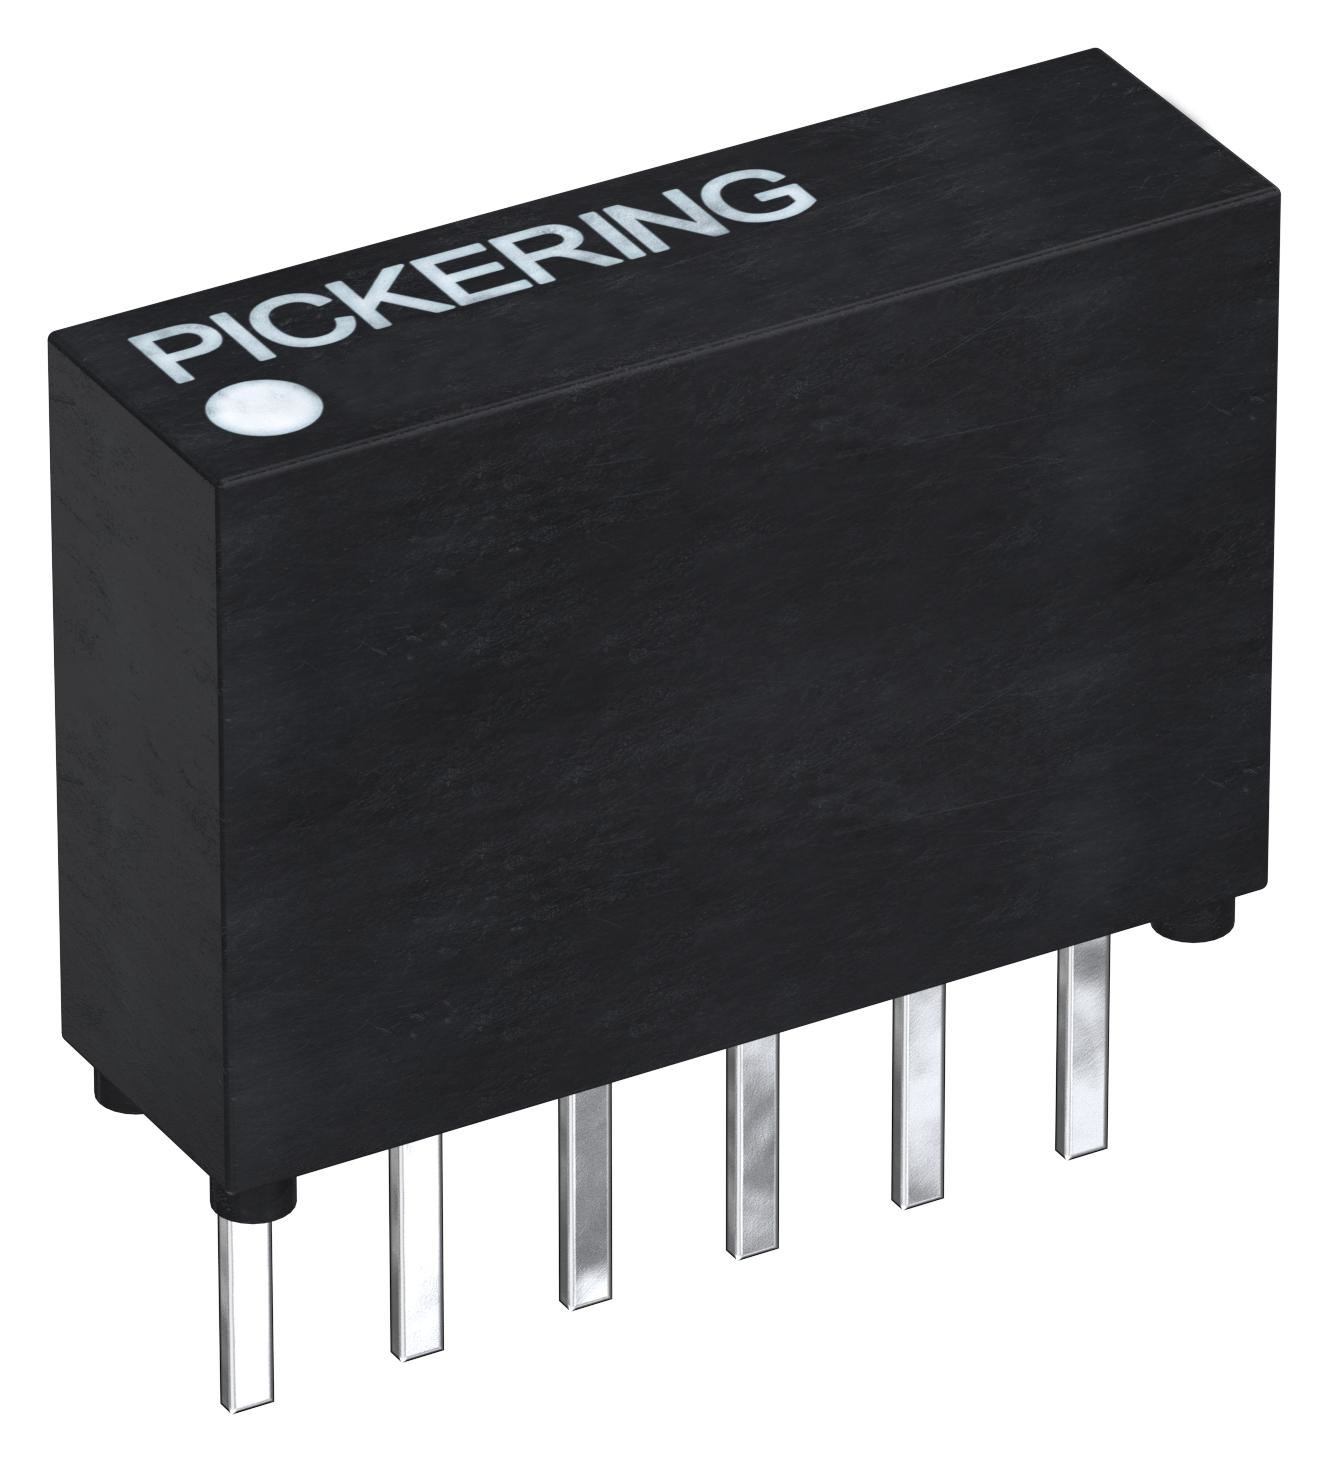 Pickering 113Rf-1-A-5/2D Reed Relay, Spst-No, 5V, 0.5A, Tht